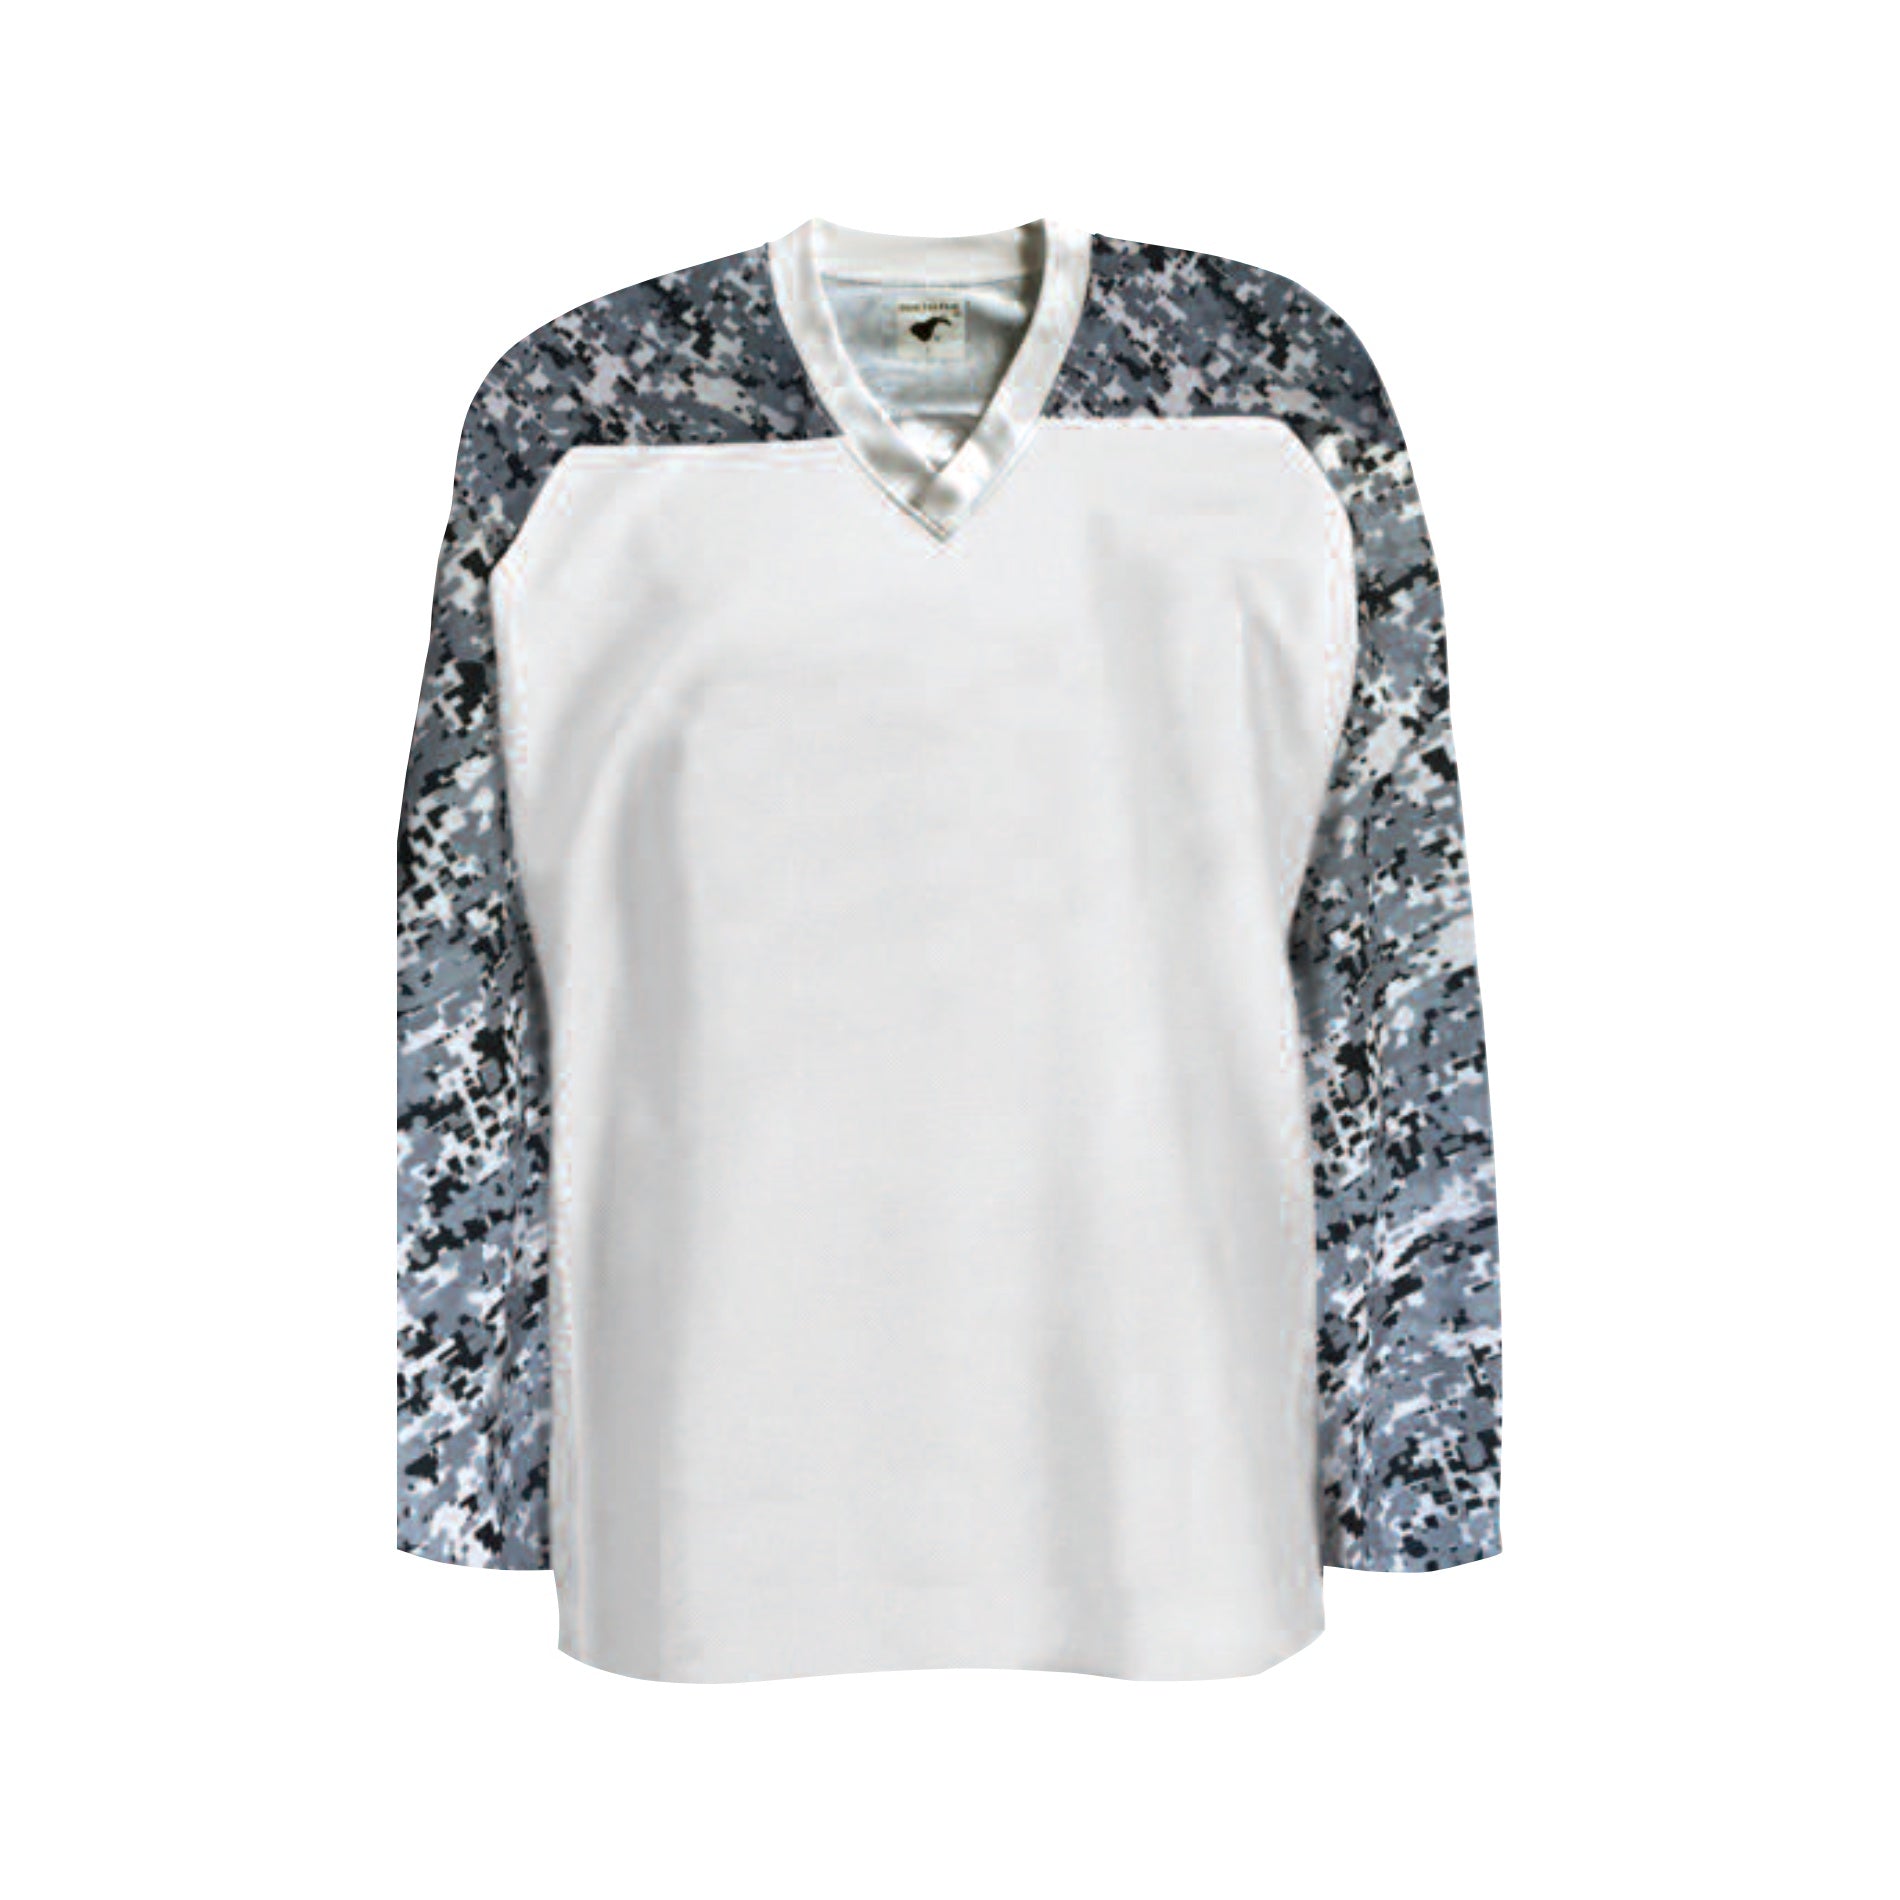 Pear Sox Pear Sox Air Mesh Practice Jersey (YOUTH WHITE CAMO)